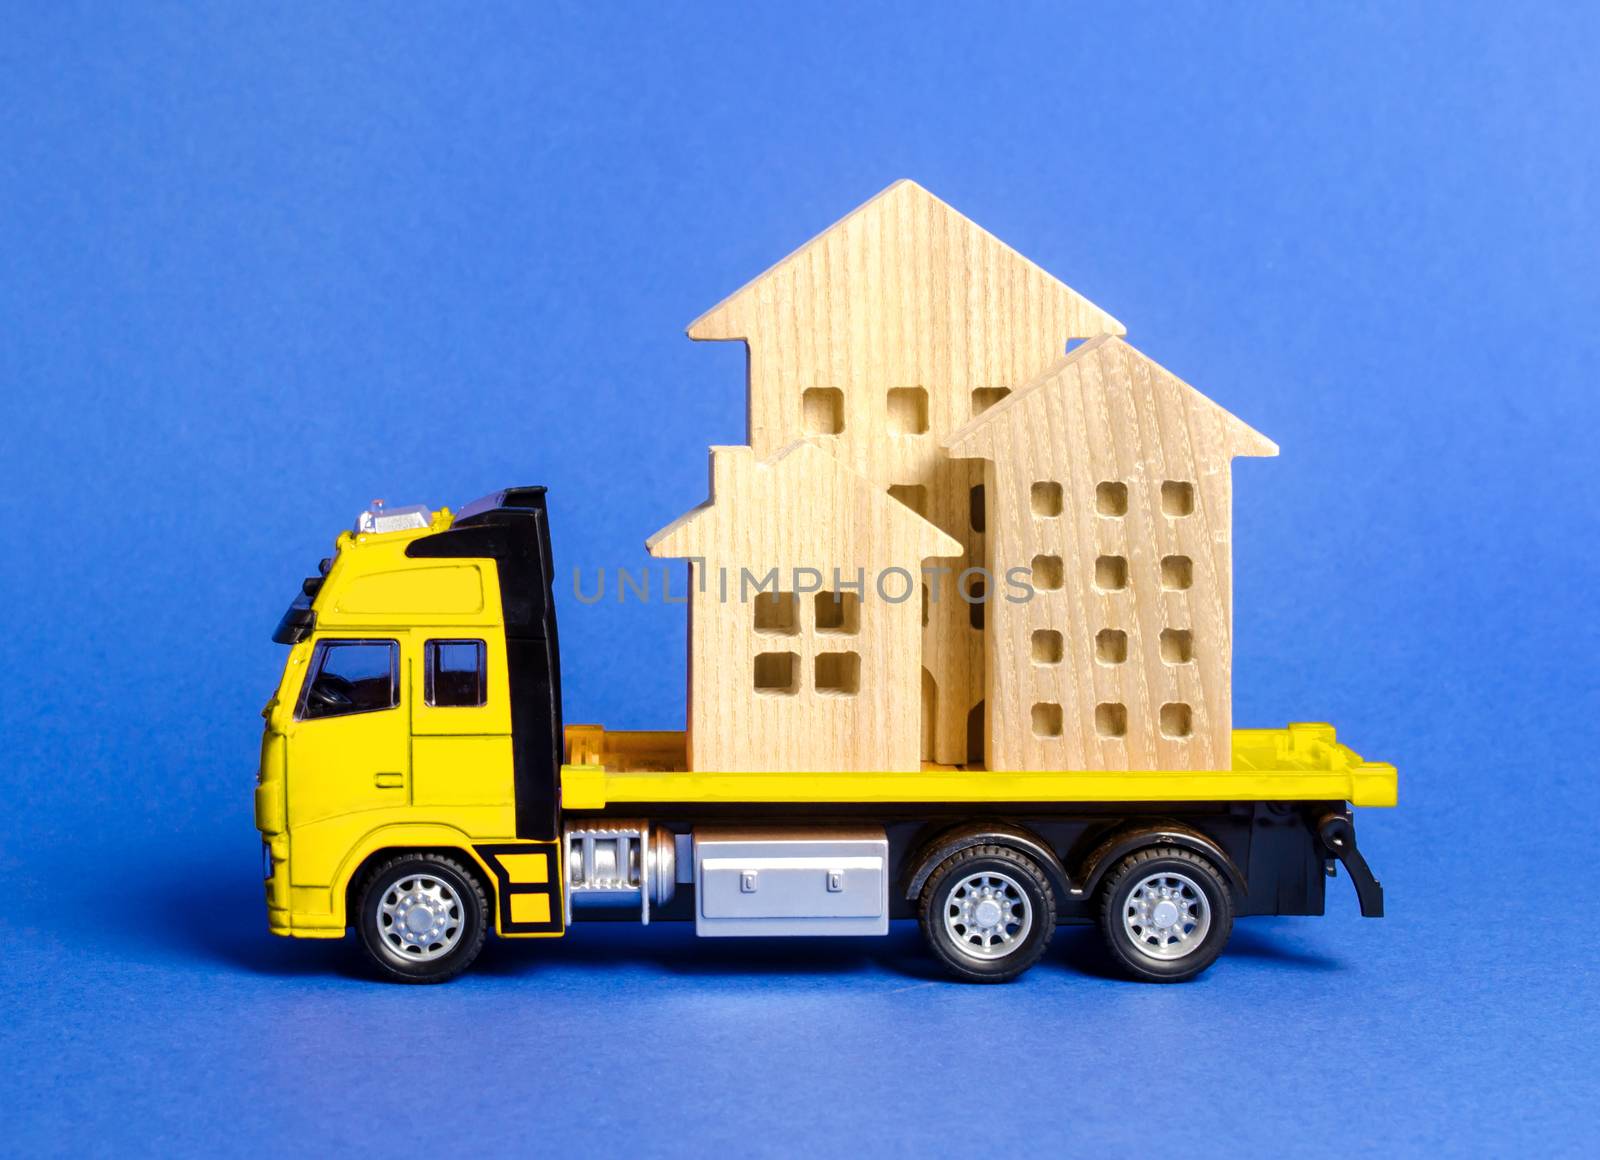 A cargo truck transports houses. Concept of transportation and cargo shipping, moving company. Construction of new houses and objects. Logistics and supply. Move entire buildings by iLixe48